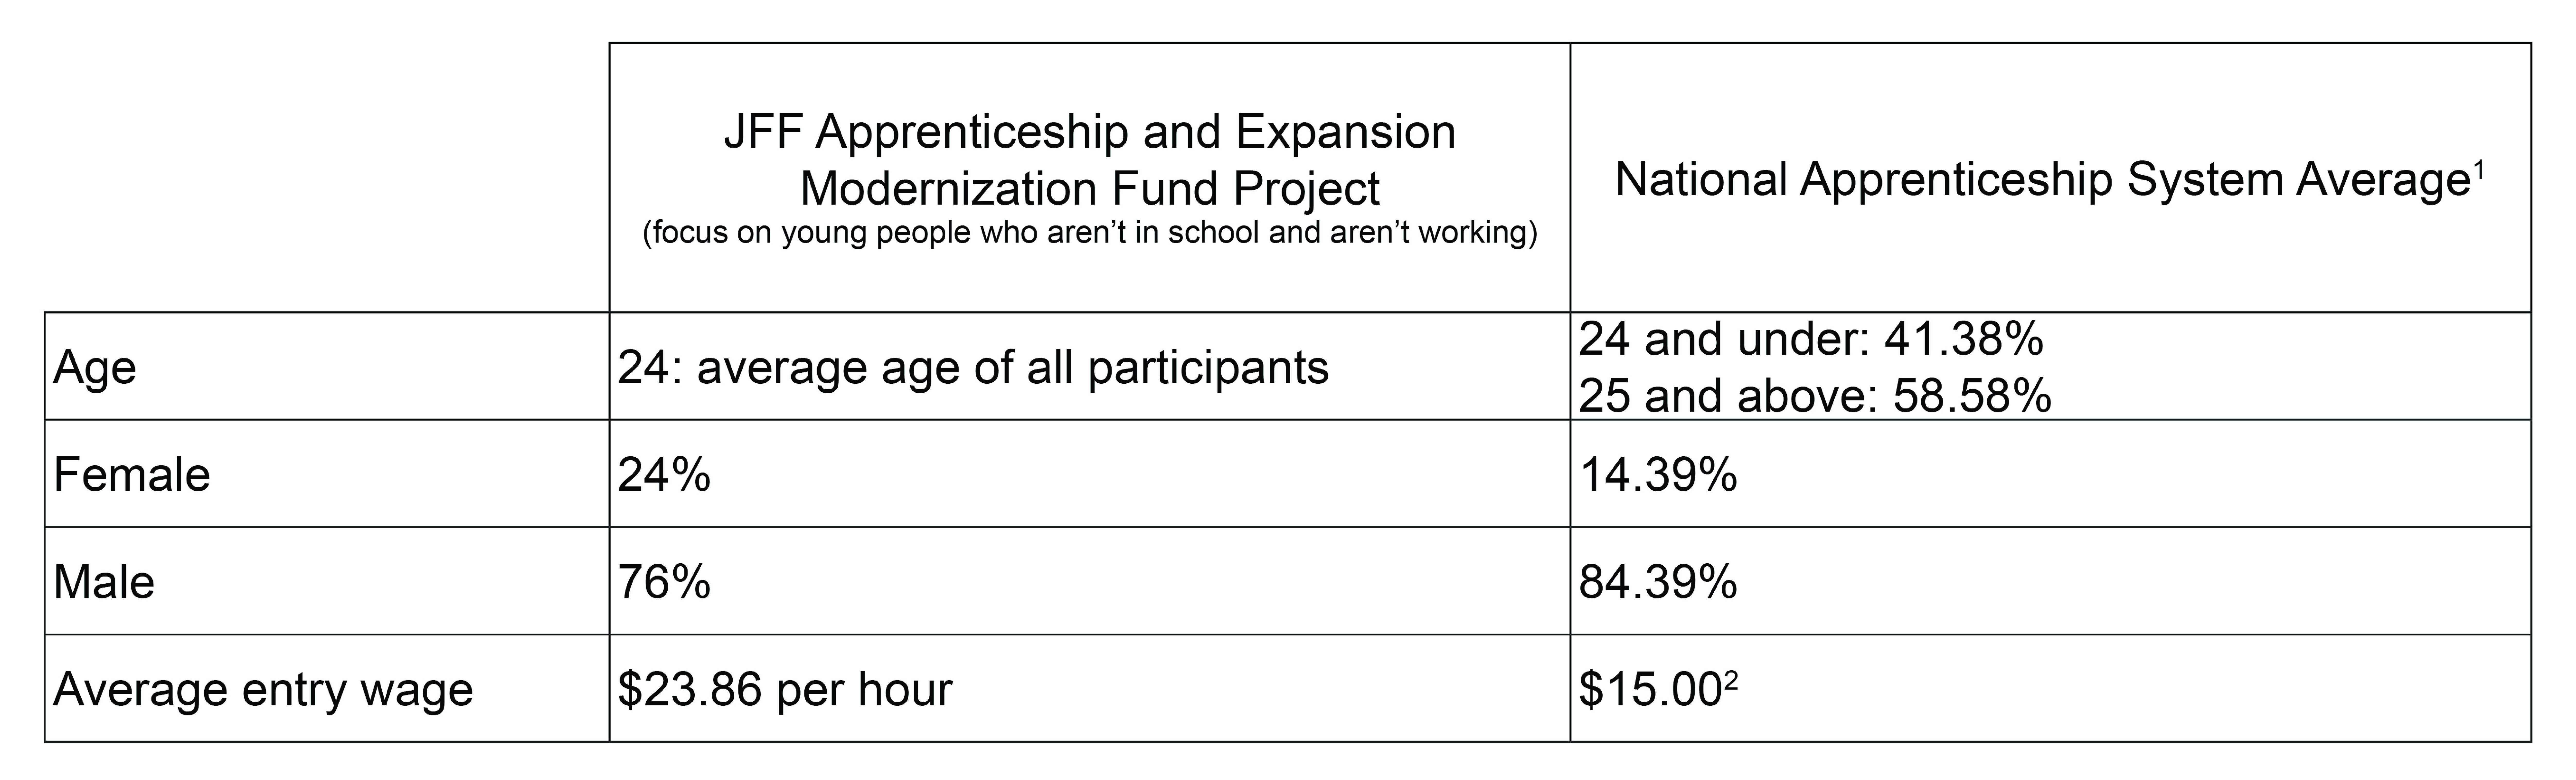 National Apprenticeship System Average" shows the average age and gender of participants in a national apprenticeship system